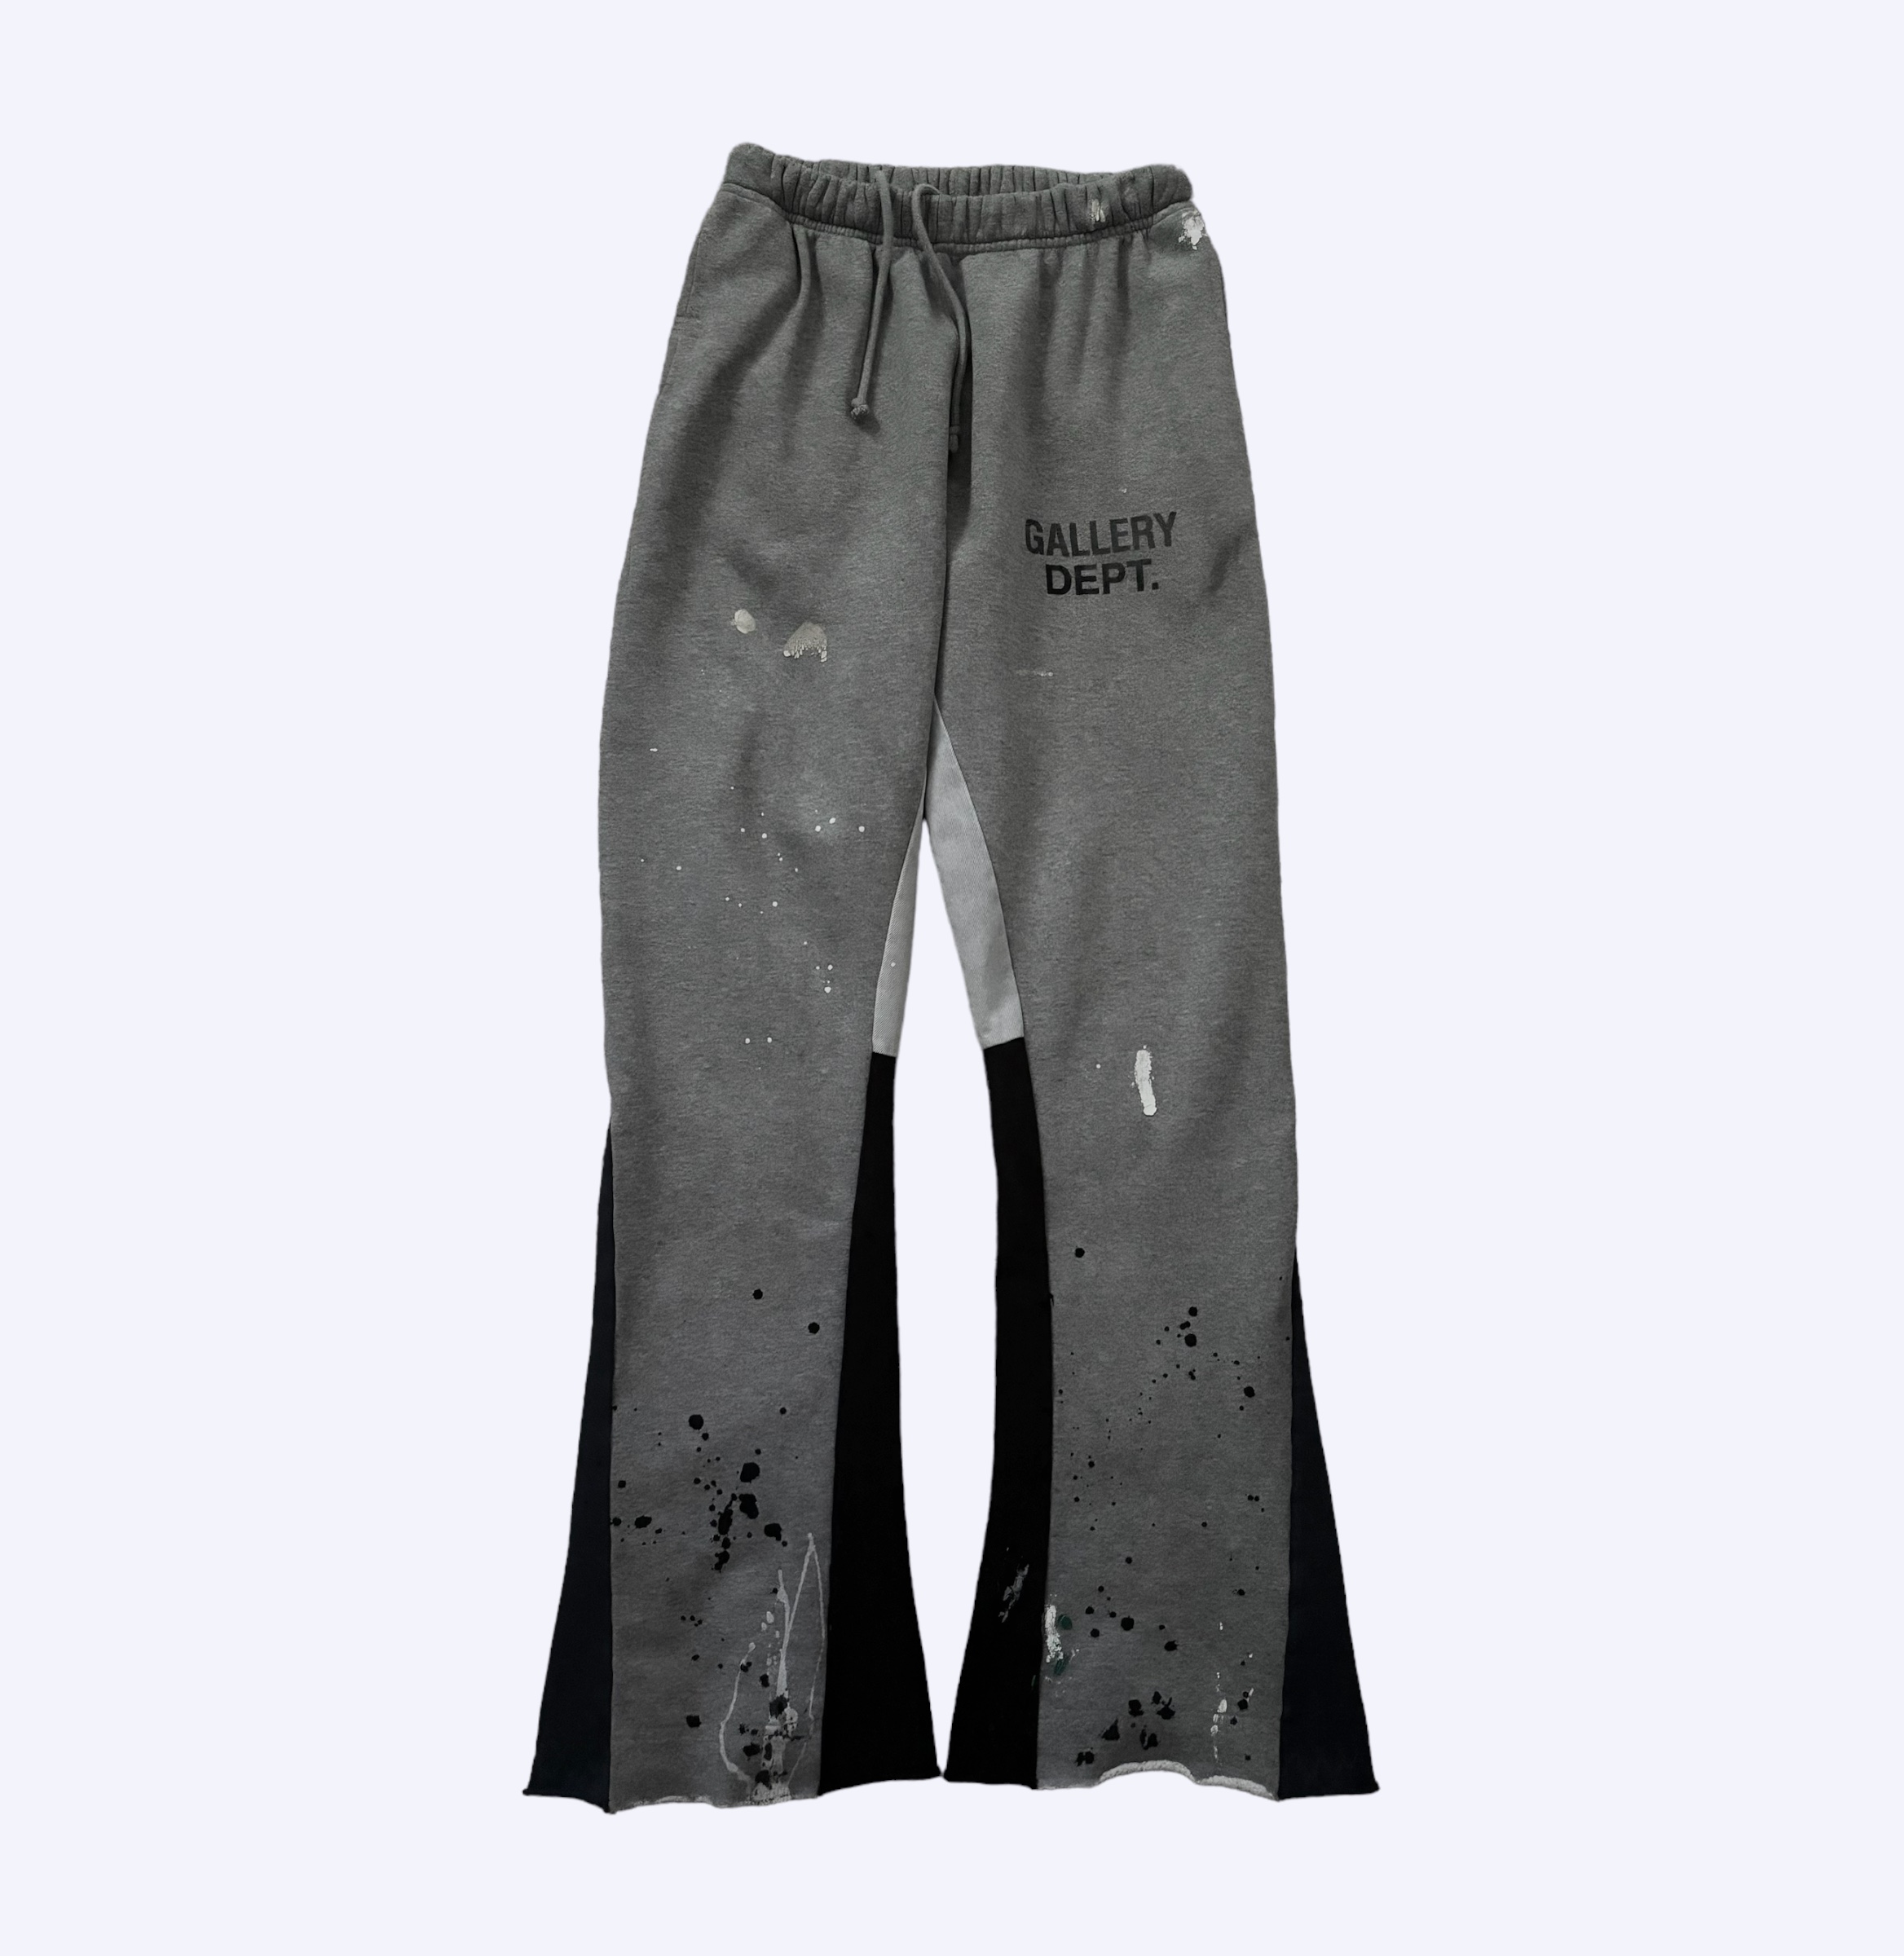 Gallery Dept. Painter Flare Sweats Front